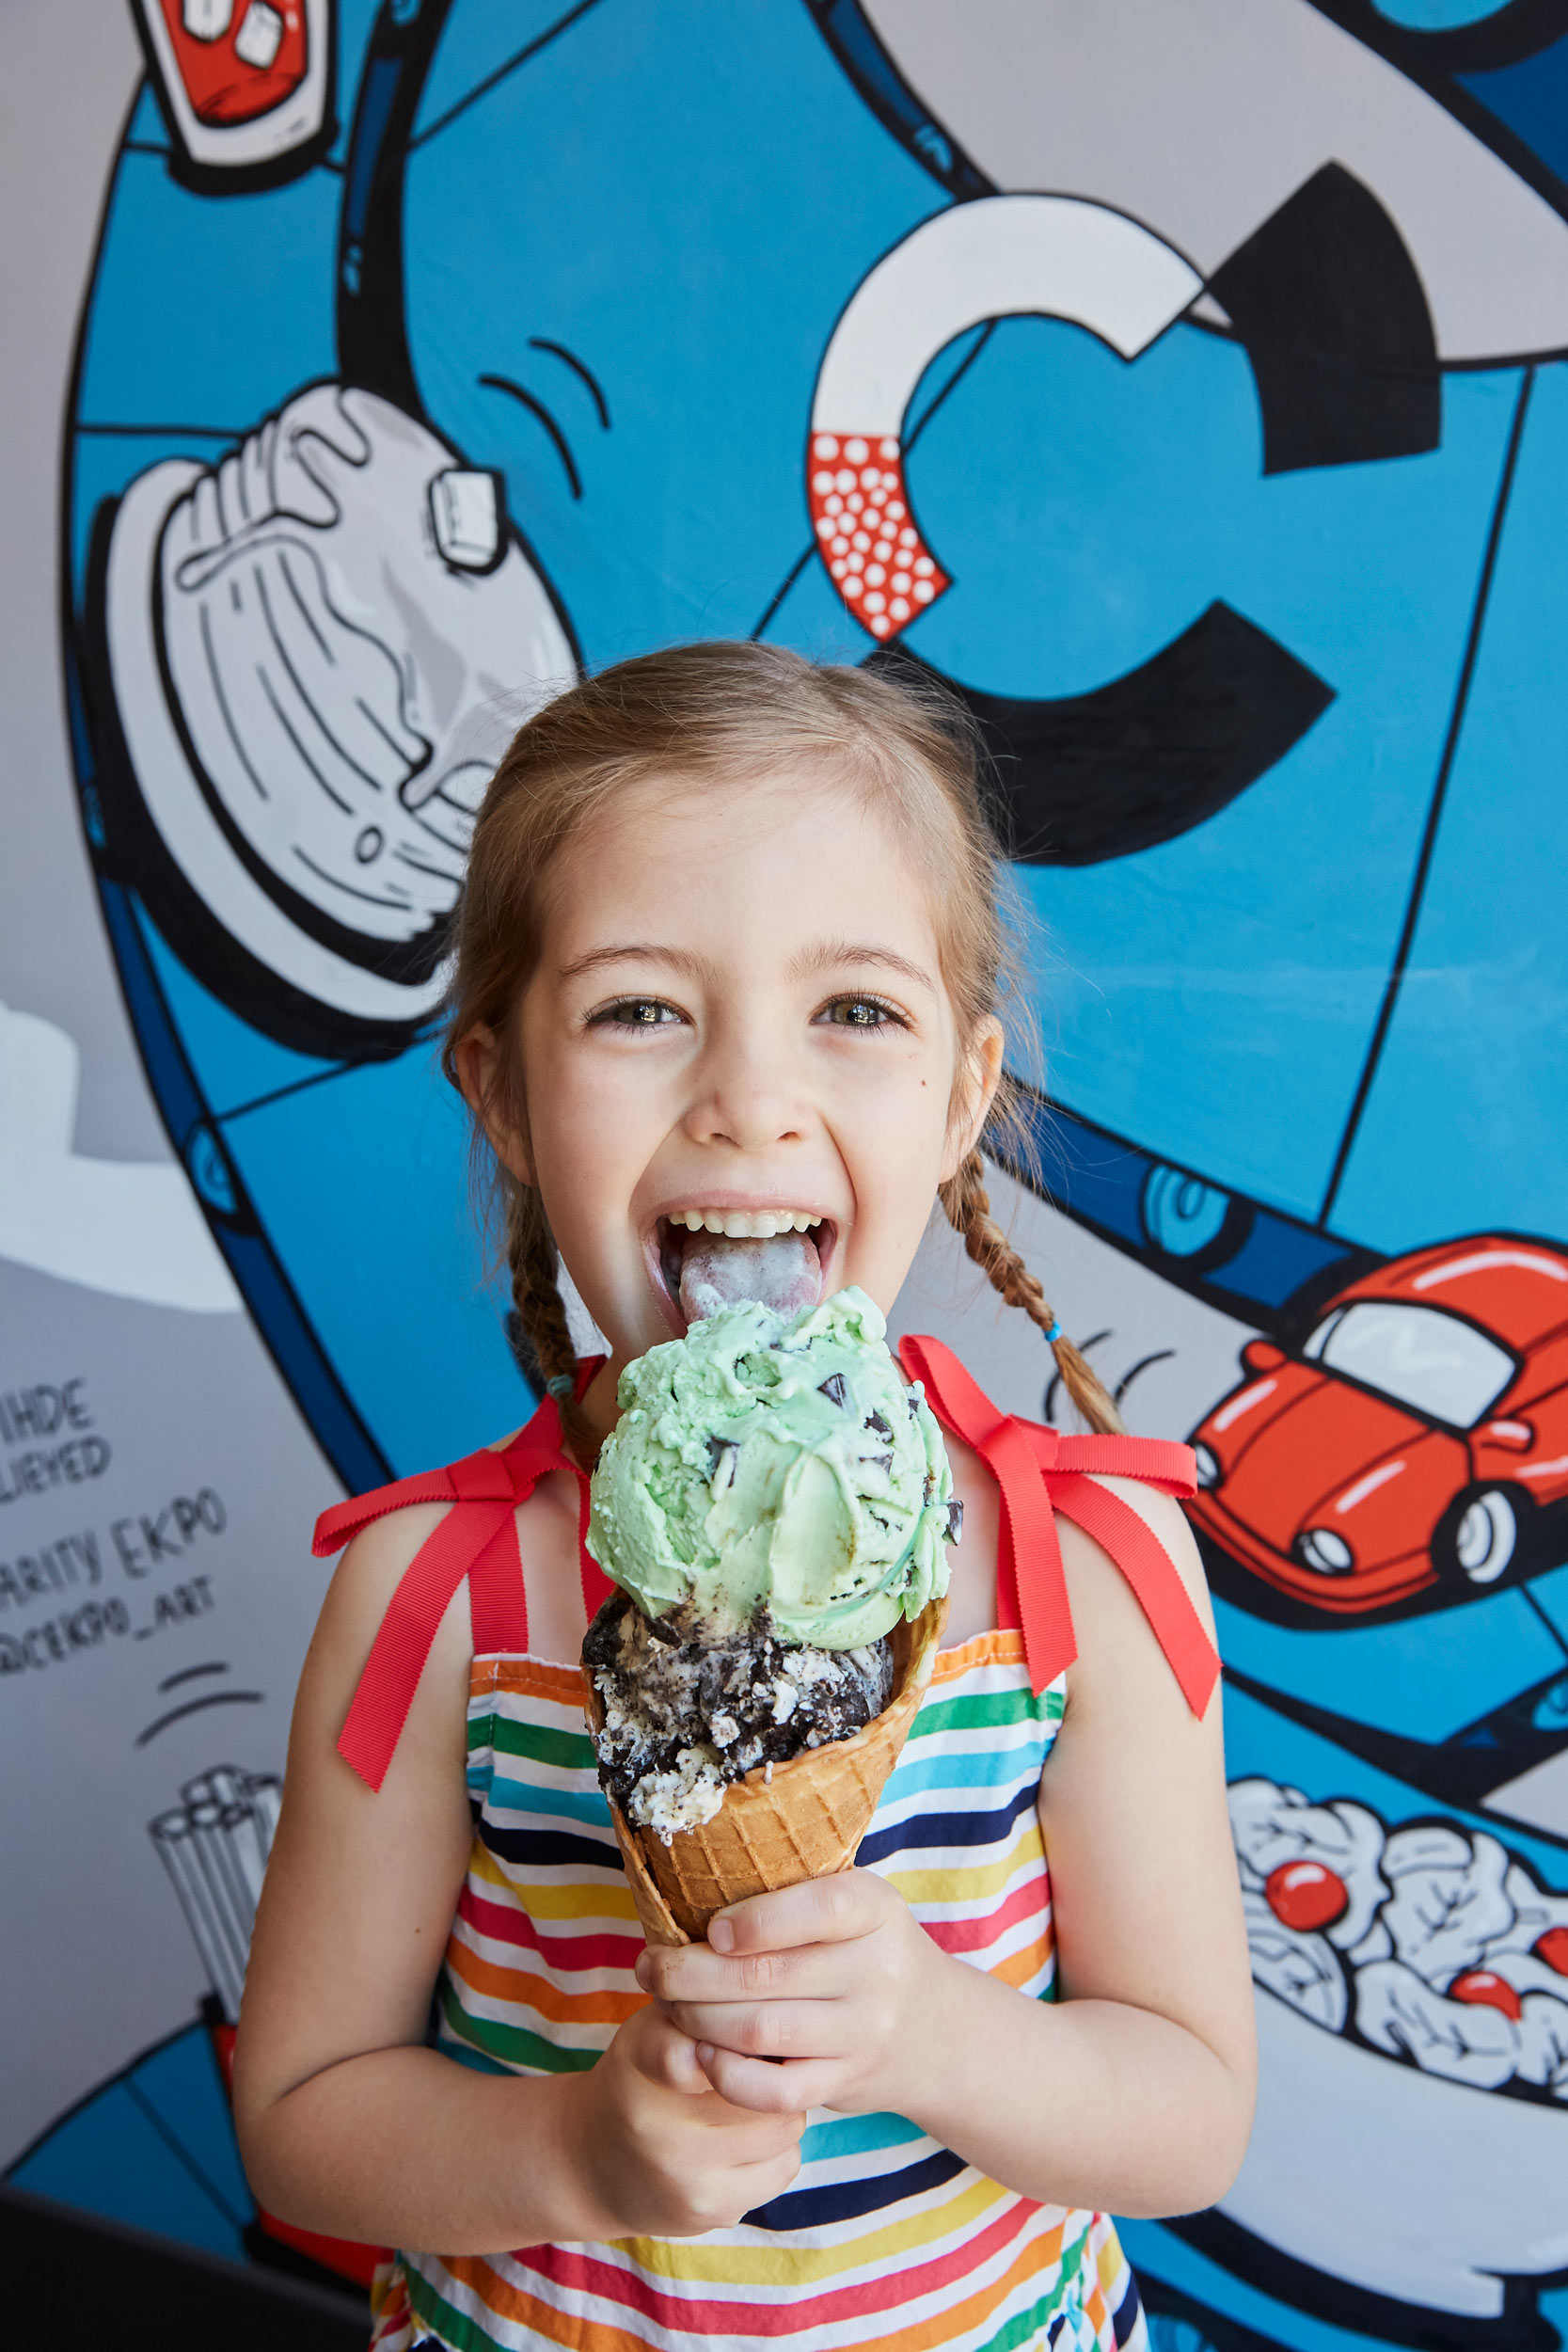 Girl with Double Scoop Ice Cream Cone photo by Chris Kessler Photography.  Chris Kessler is a freelance Photographer based in Milwaukee Wisconsin. Specializing in Food photography and portraiture.